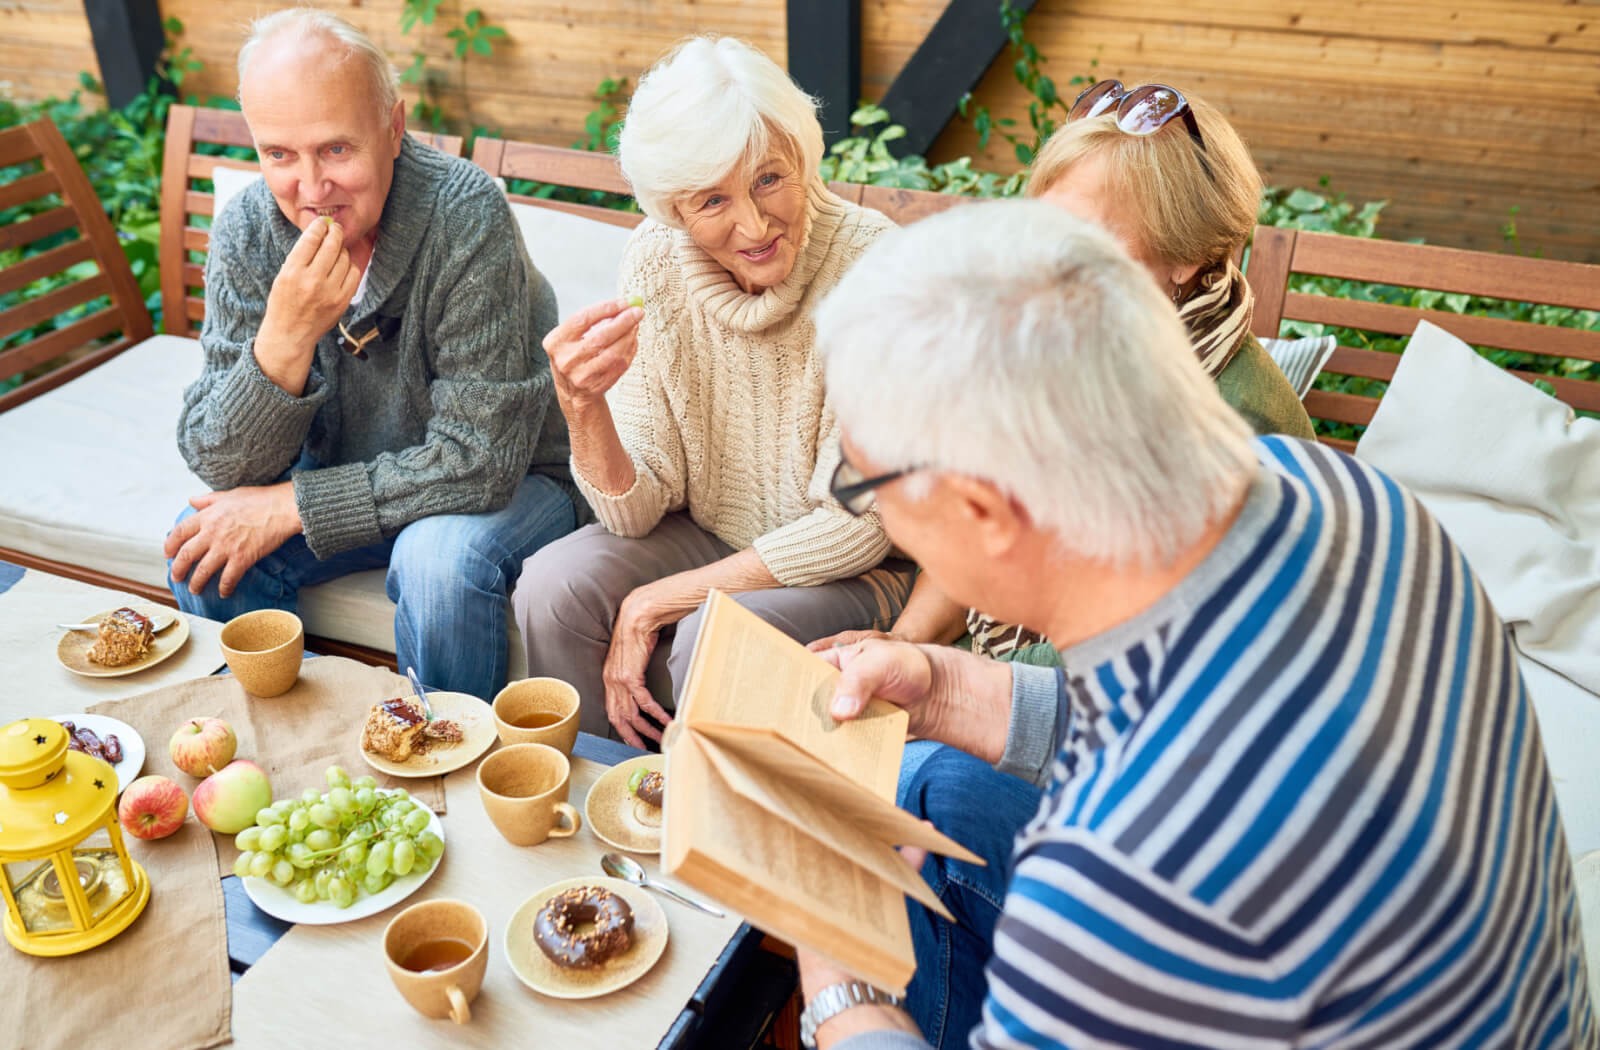 A group of older adults hanging out outdoors while having some snacks together.